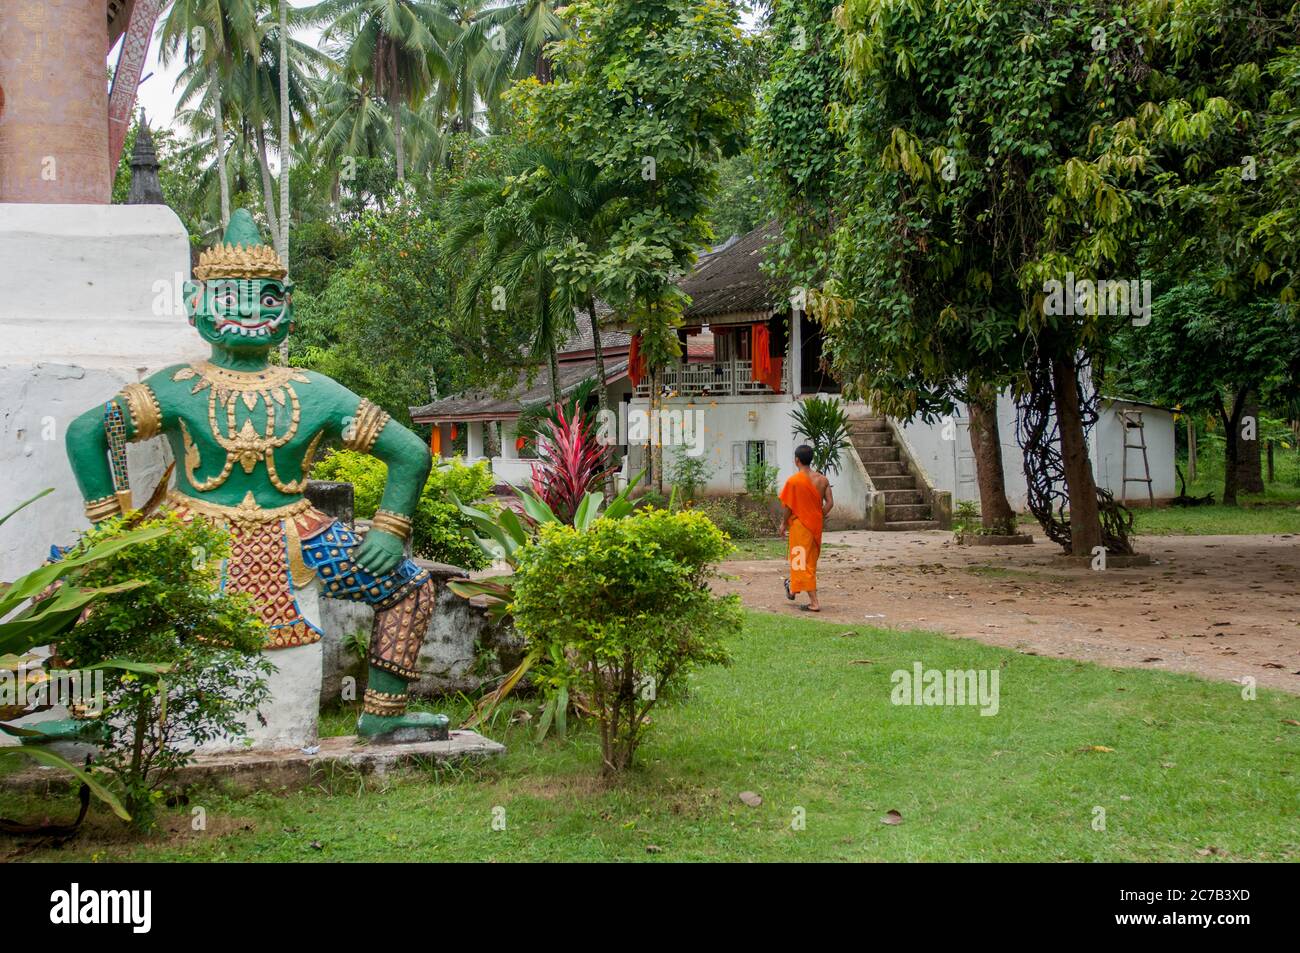 A guardian statue at Wat Aham, which served as the Residence of the Sangkhalat, the Supreme Patriarch of Buddhism, in Luang Prabang, central Laos. Stock Photo